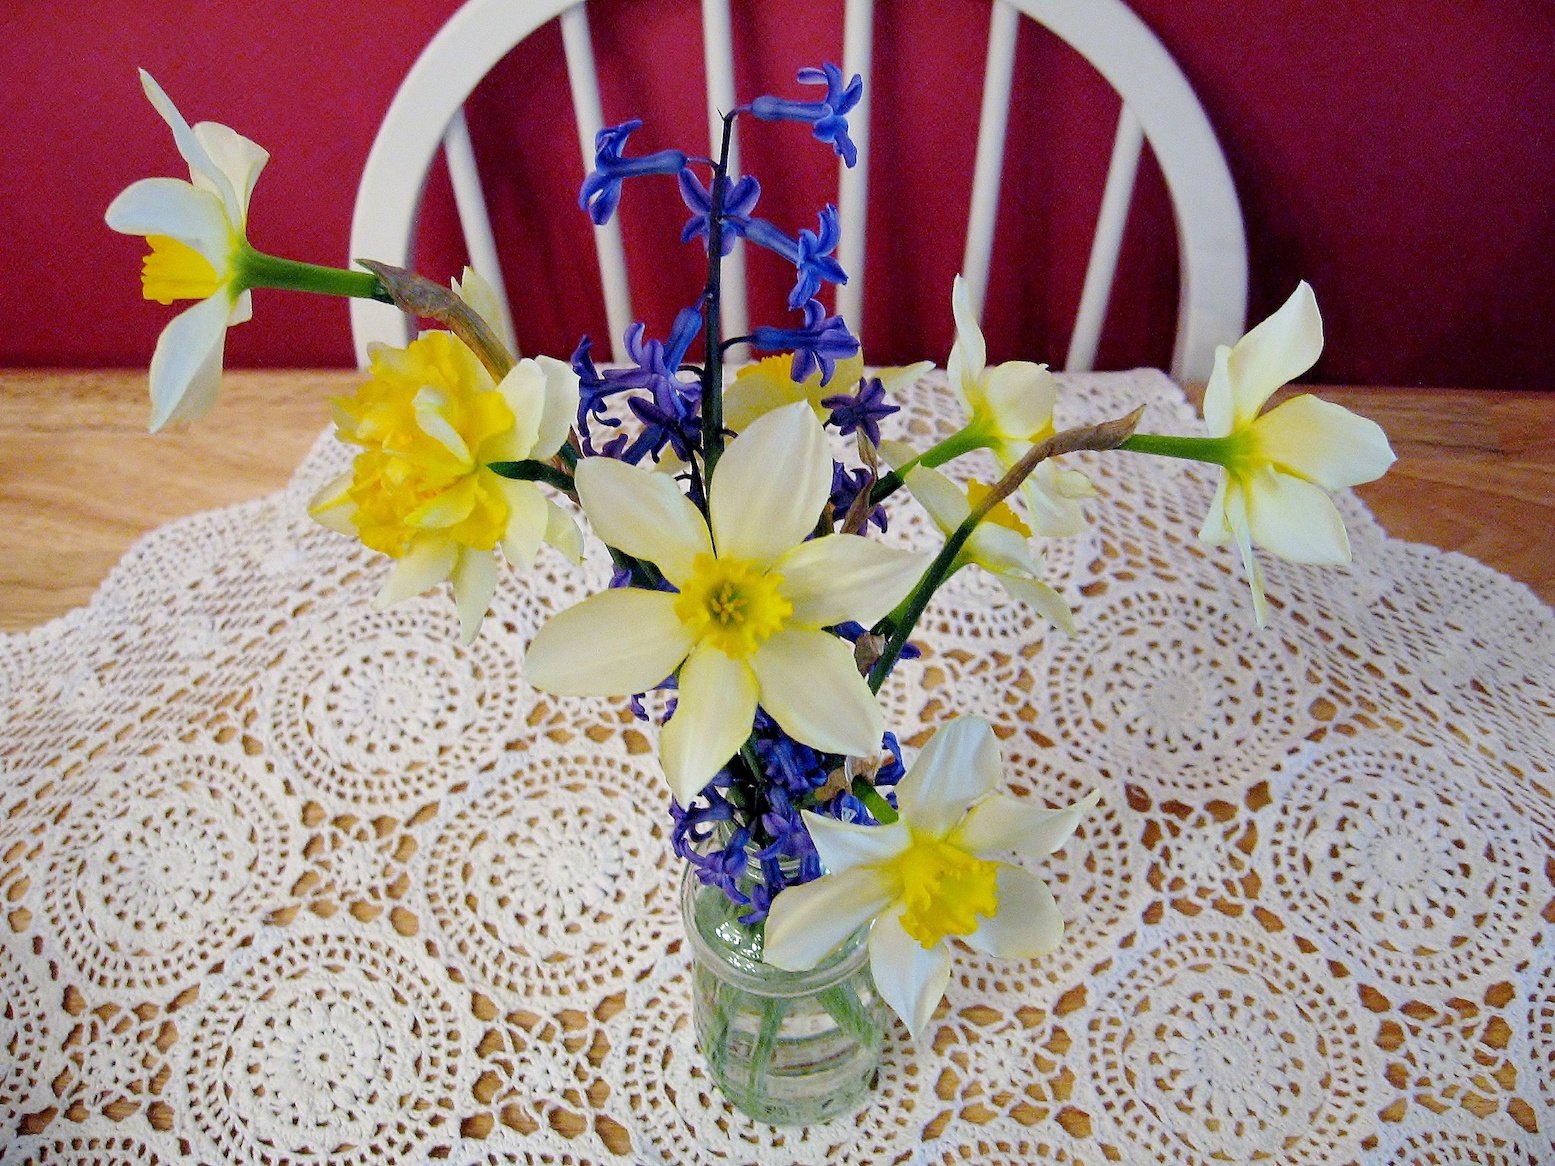 Daffodils and Hyacinth with Lace table cloth